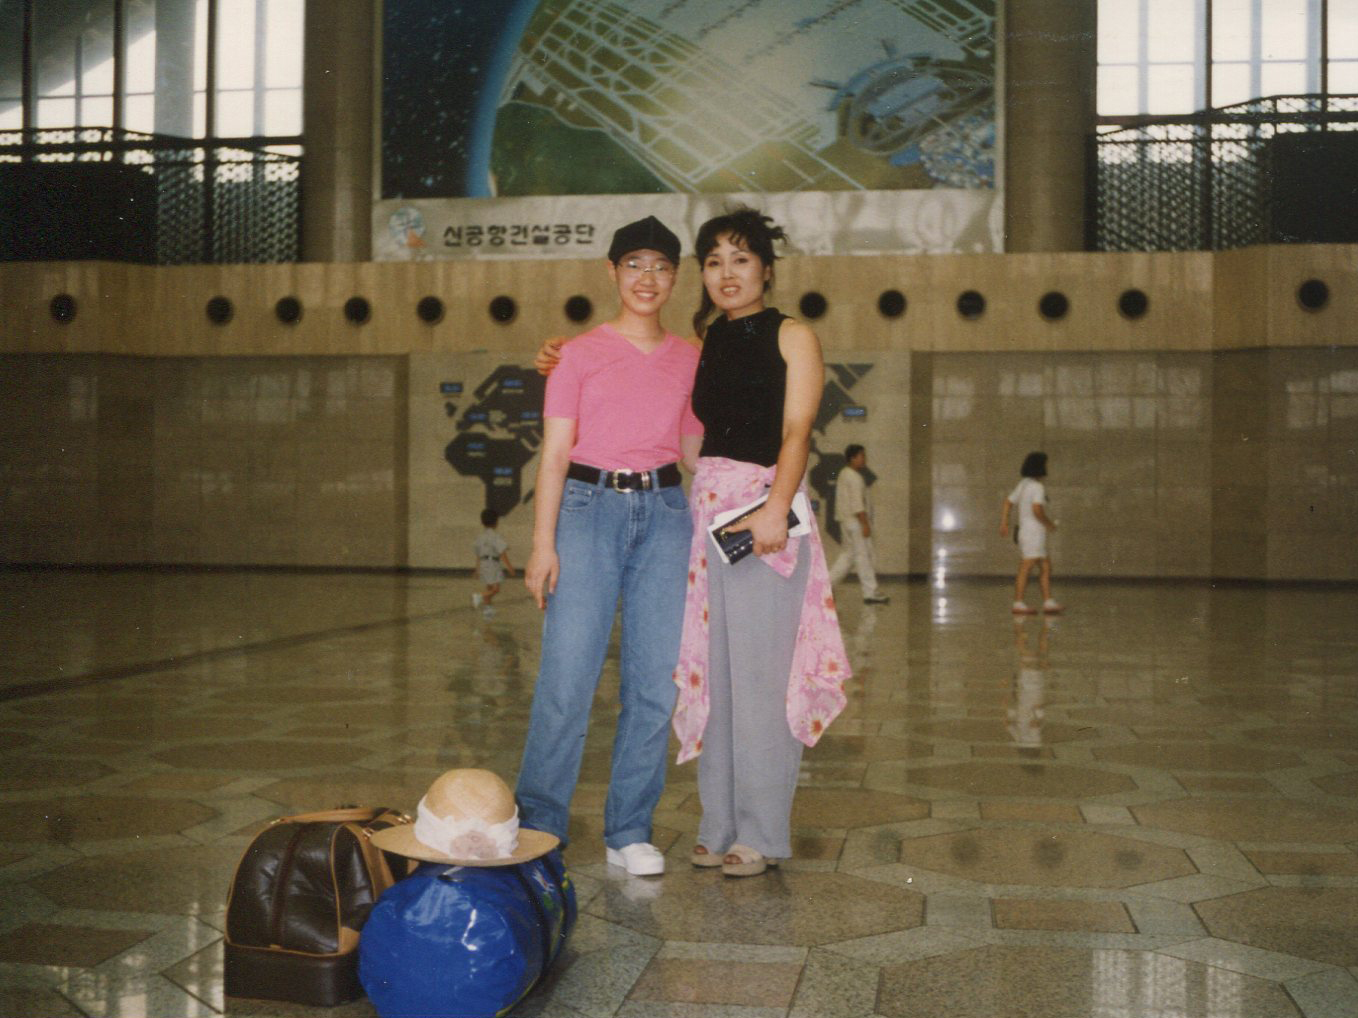 Robin Ha and her mother, Cassie, at an airport in South Korea, on their way to the U.S., in 1995.